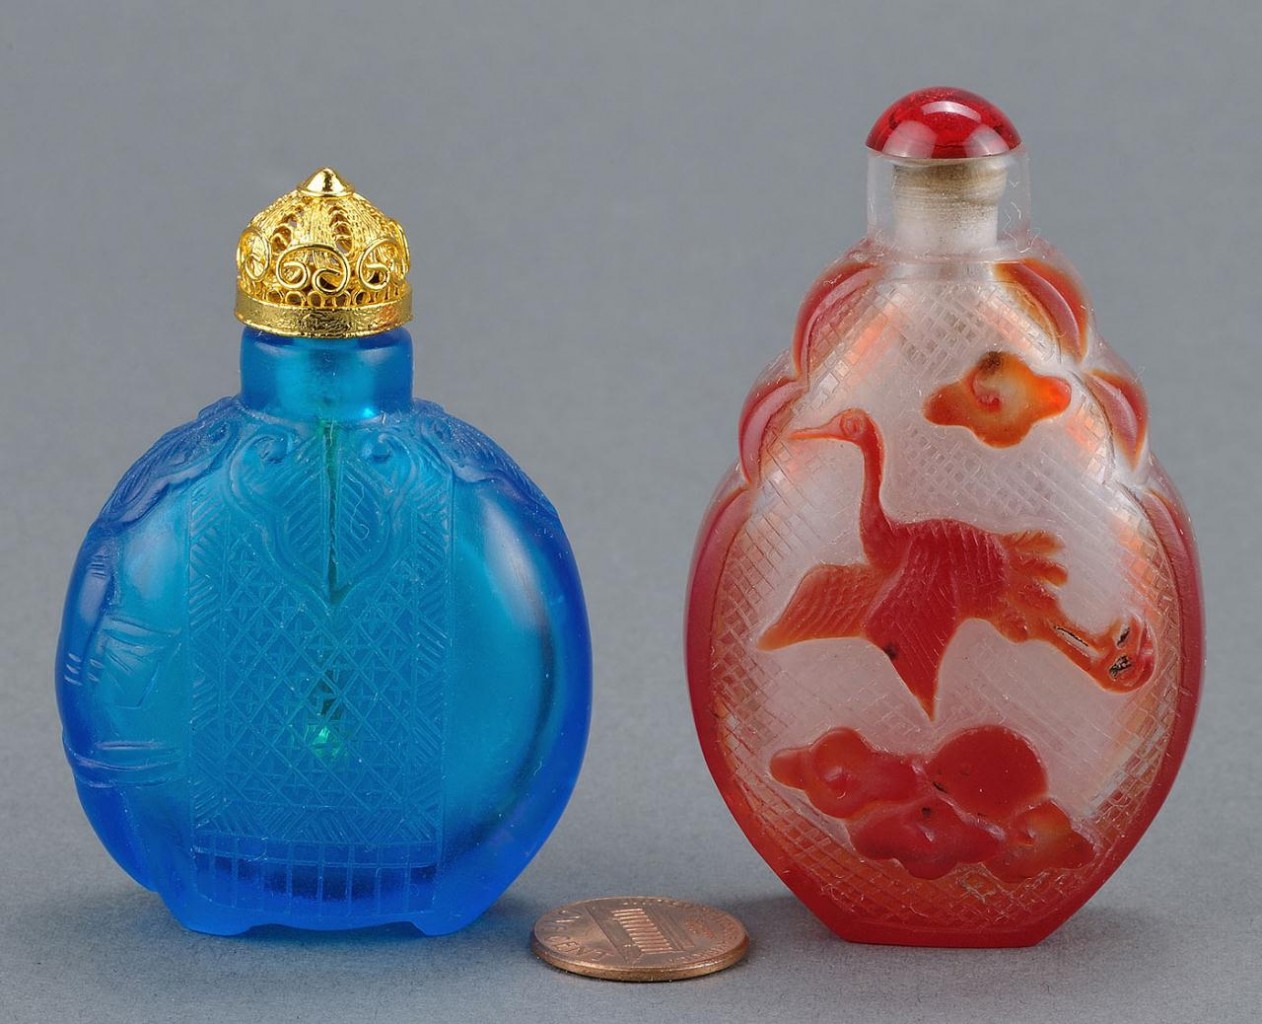 Lot 391: 3 Chinese Glass Snuff Bottles, 20th century